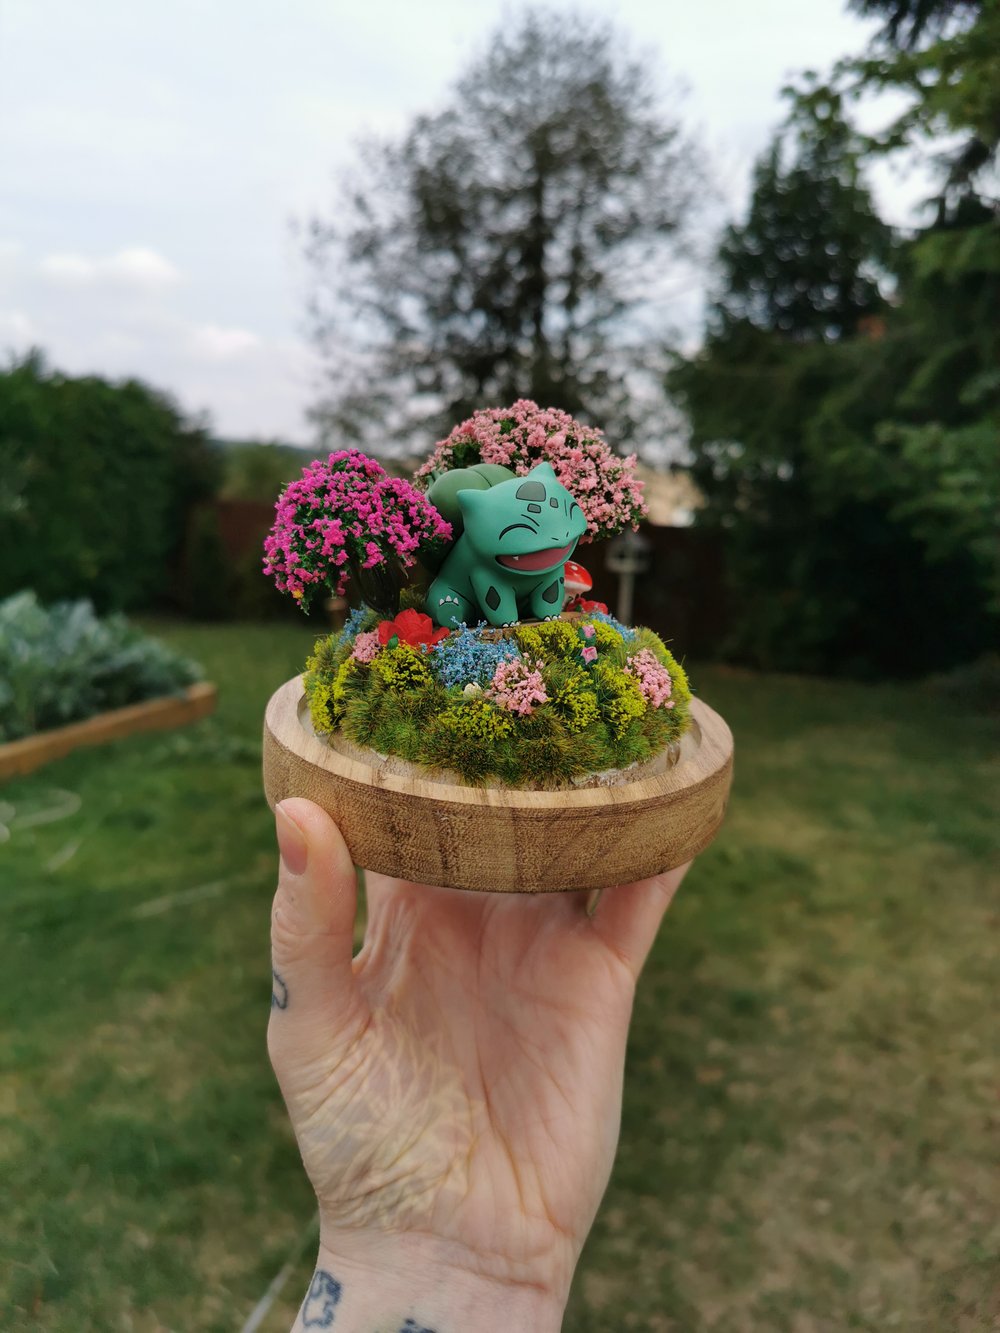 Bulbasaur display dome MADE TO ORDER READ DESCRIPTION 